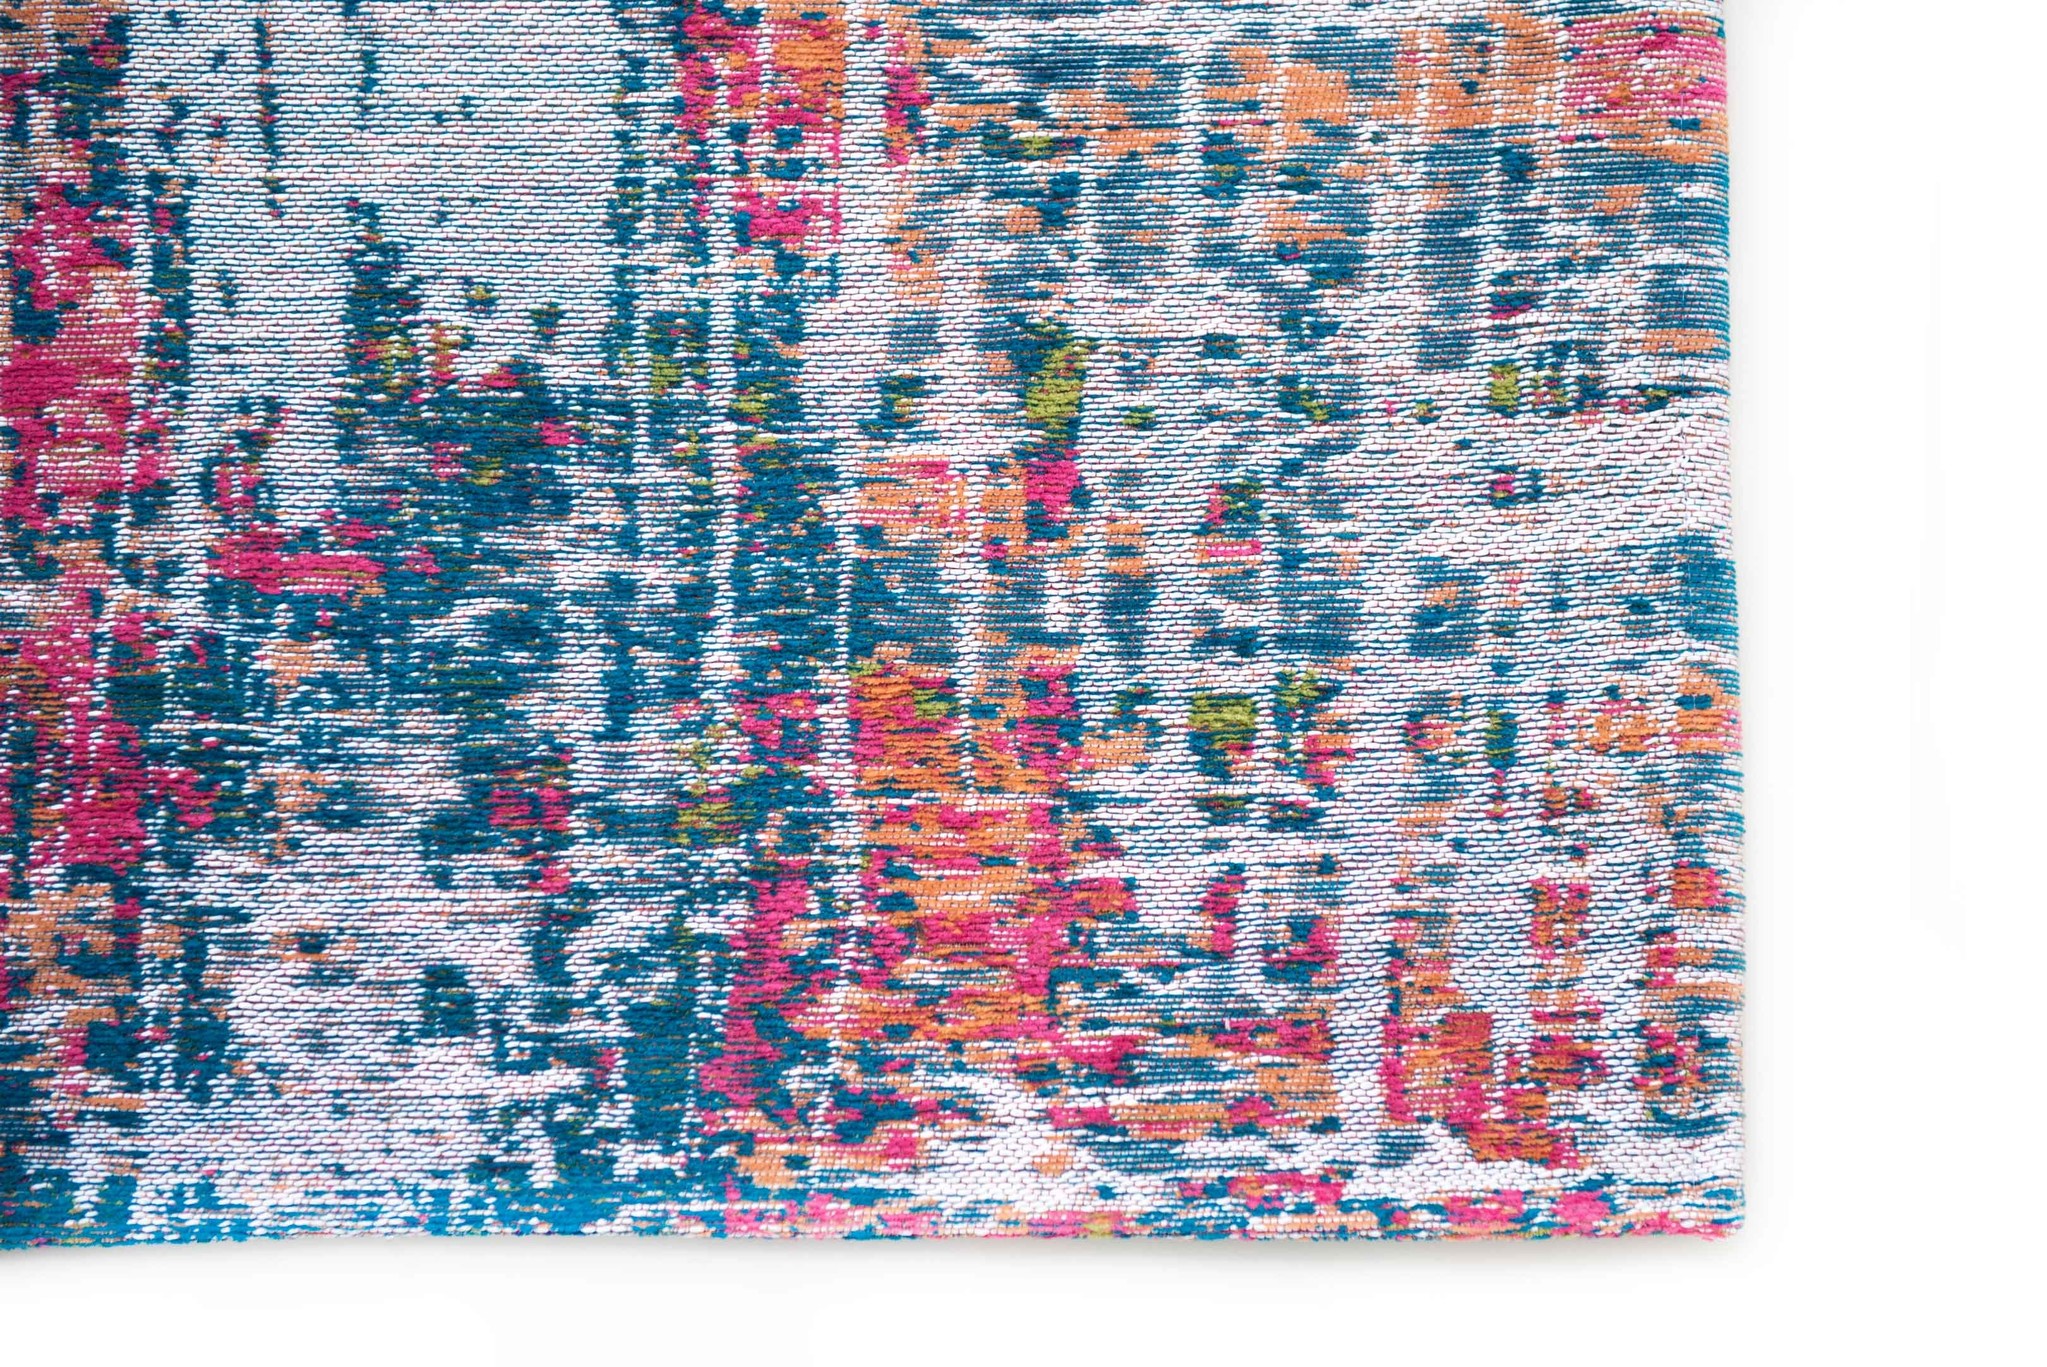 Abstract Multi Flatwoven Rug ☞ Size: 4' 7" x 6' 7" (140 x 200 cm)